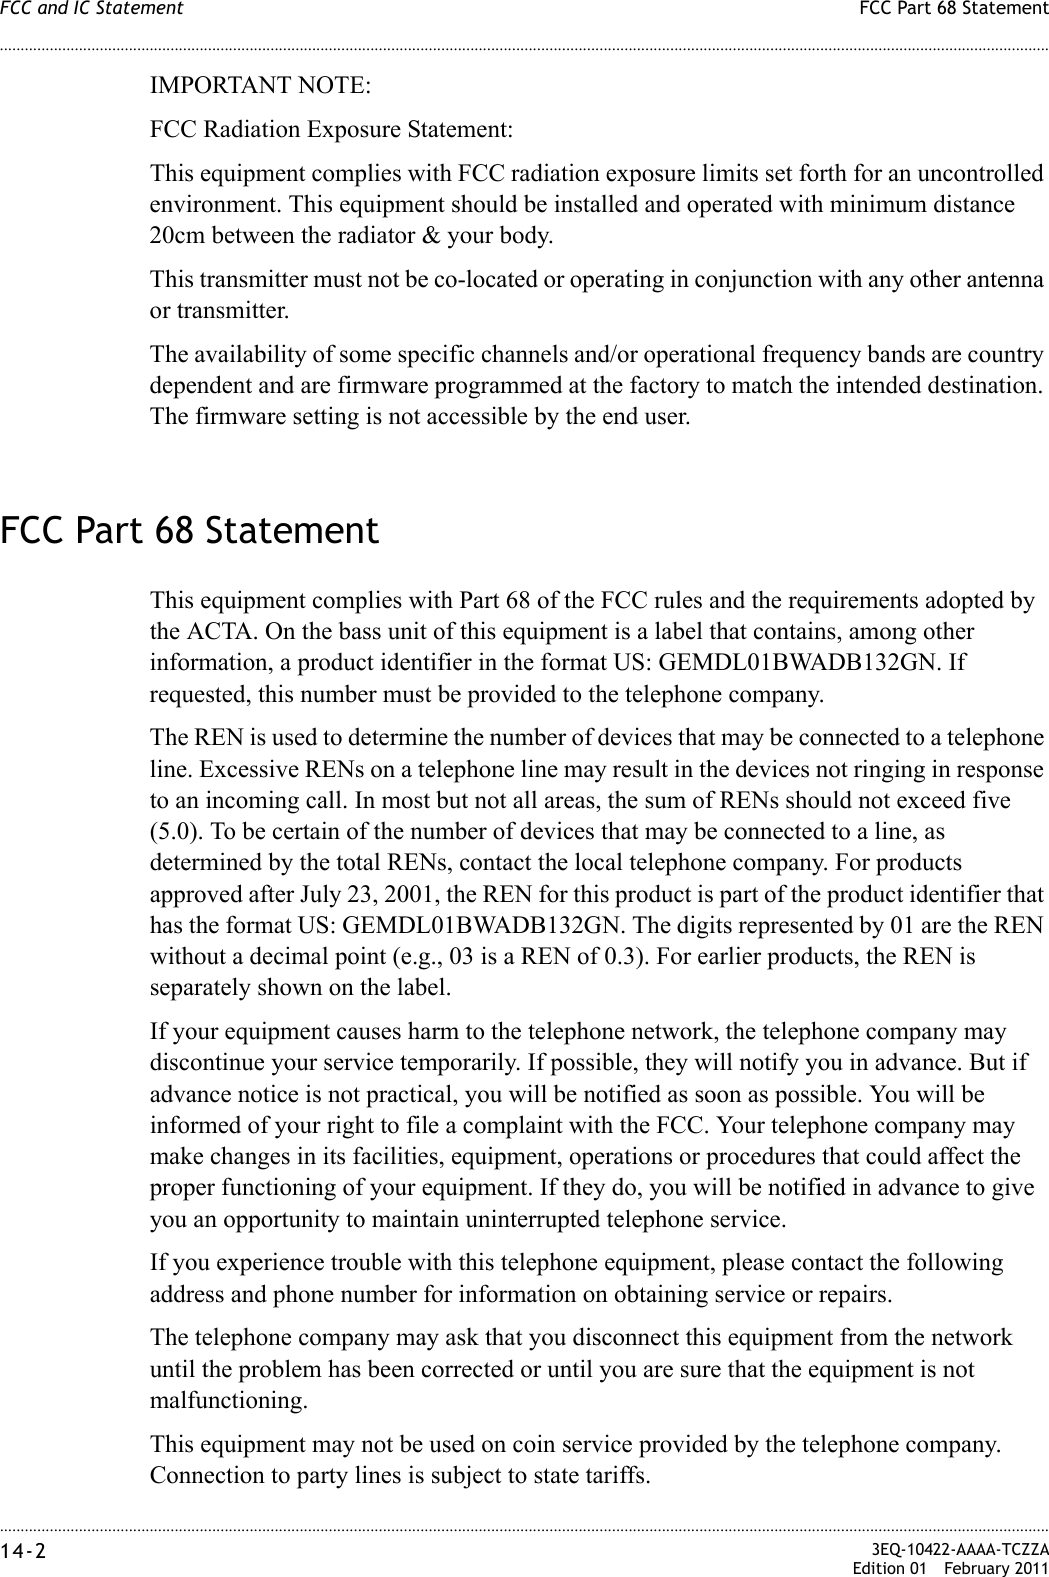 ............................................................................................................................................................................................................................................................FCC Part 68 StatementFCC and IC Statement14-2  3EQ-10422-AAAA-TCZZAEdition 01 February 2011............................................................................................................................................................................................................................................................IMPORTANT NOTE:FCC Radiation Exposure Statement:This equipment complies with FCC radiation exposure limits set forth for an uncontrolled environment. This equipment should be installed and operated with minimum distance 20cm between the radiator &amp; your body.This transmitter must not be co-located or operating in conjunction with any other antenna or transmitter.The availability of some specific channels and/or operational frequency bands are country dependent and are firmware programmed at the factory to match the intended destination. The firmware setting is not accessible by the end user.FCC Part 68 StatementThis equipment complies with Part 68 of the FCC rules and the requirements adopted by the ACTA. On the bass unit of this equipment is a label that contains, among other information, a product identifier in the format US: GEMDL01BWADB132GN. If requested, this number must be provided to the telephone company.The REN is used to determine the number of devices that may be connected to a telephone line. Excessive RENs on a telephone line may result in the devices not ringing in response to an incoming call. In most but not all areas, the sum of RENs should not exceed five (5.0). To be certain of the number of devices that may be connected to a line, as determined by the total RENs, contact the local telephone company. For products approved after July 23, 2001, the REN for this product is part of the product identifier that has the format US: GEMDL01BWADB132GN. The digits represented by 01 are the REN without a decimal point (e.g., 03 is a REN of 0.3). For earlier products, the REN is separately shown on the label.If your equipment causes harm to the telephone network, the telephone company may discontinue your service temporarily. If possible, they will notify you in advance. But if advance notice is not practical, you will be notified as soon as possible. You will be informed of your right to file a complaint with the FCC. Your telephone company may make changes in its facilities, equipment, operations or procedures that could affect the proper functioning of your equipment. If they do, you will be notified in advance to give you an opportunity to maintain uninterrupted telephone service.If you experience trouble with this telephone equipment, please contact the following address and phone number for information on obtaining service or repairs.The telephone company may ask that you disconnect this equipment from the network until the problem has been corrected or until you are sure that the equipment is not malfunctioning.This equipment may not be used on coin service provided by the telephone company. Connection to party lines is subject to state tariffs.